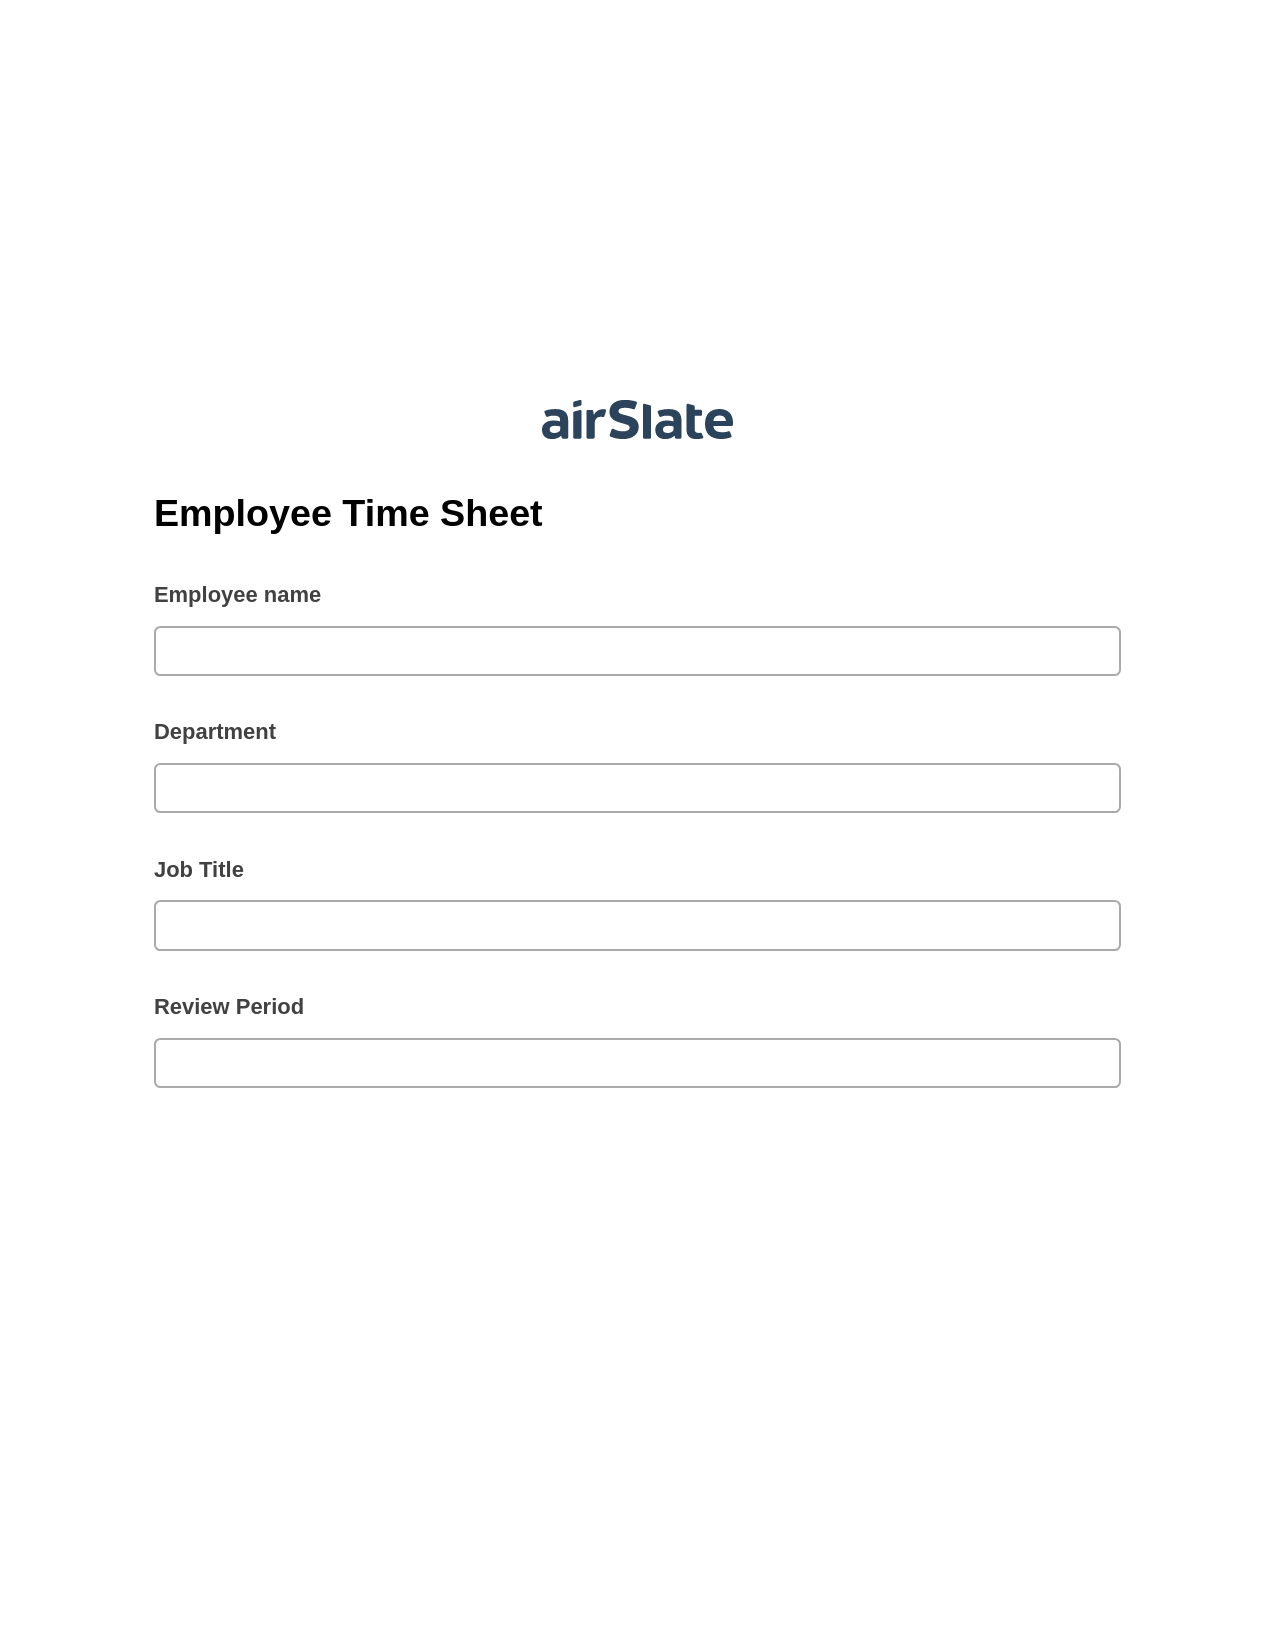 Multirole Employee Time Sheet Pre-fill from CSV File Bot, Create Salesforce Records Bot, Text Message Notification Postfinish Bot